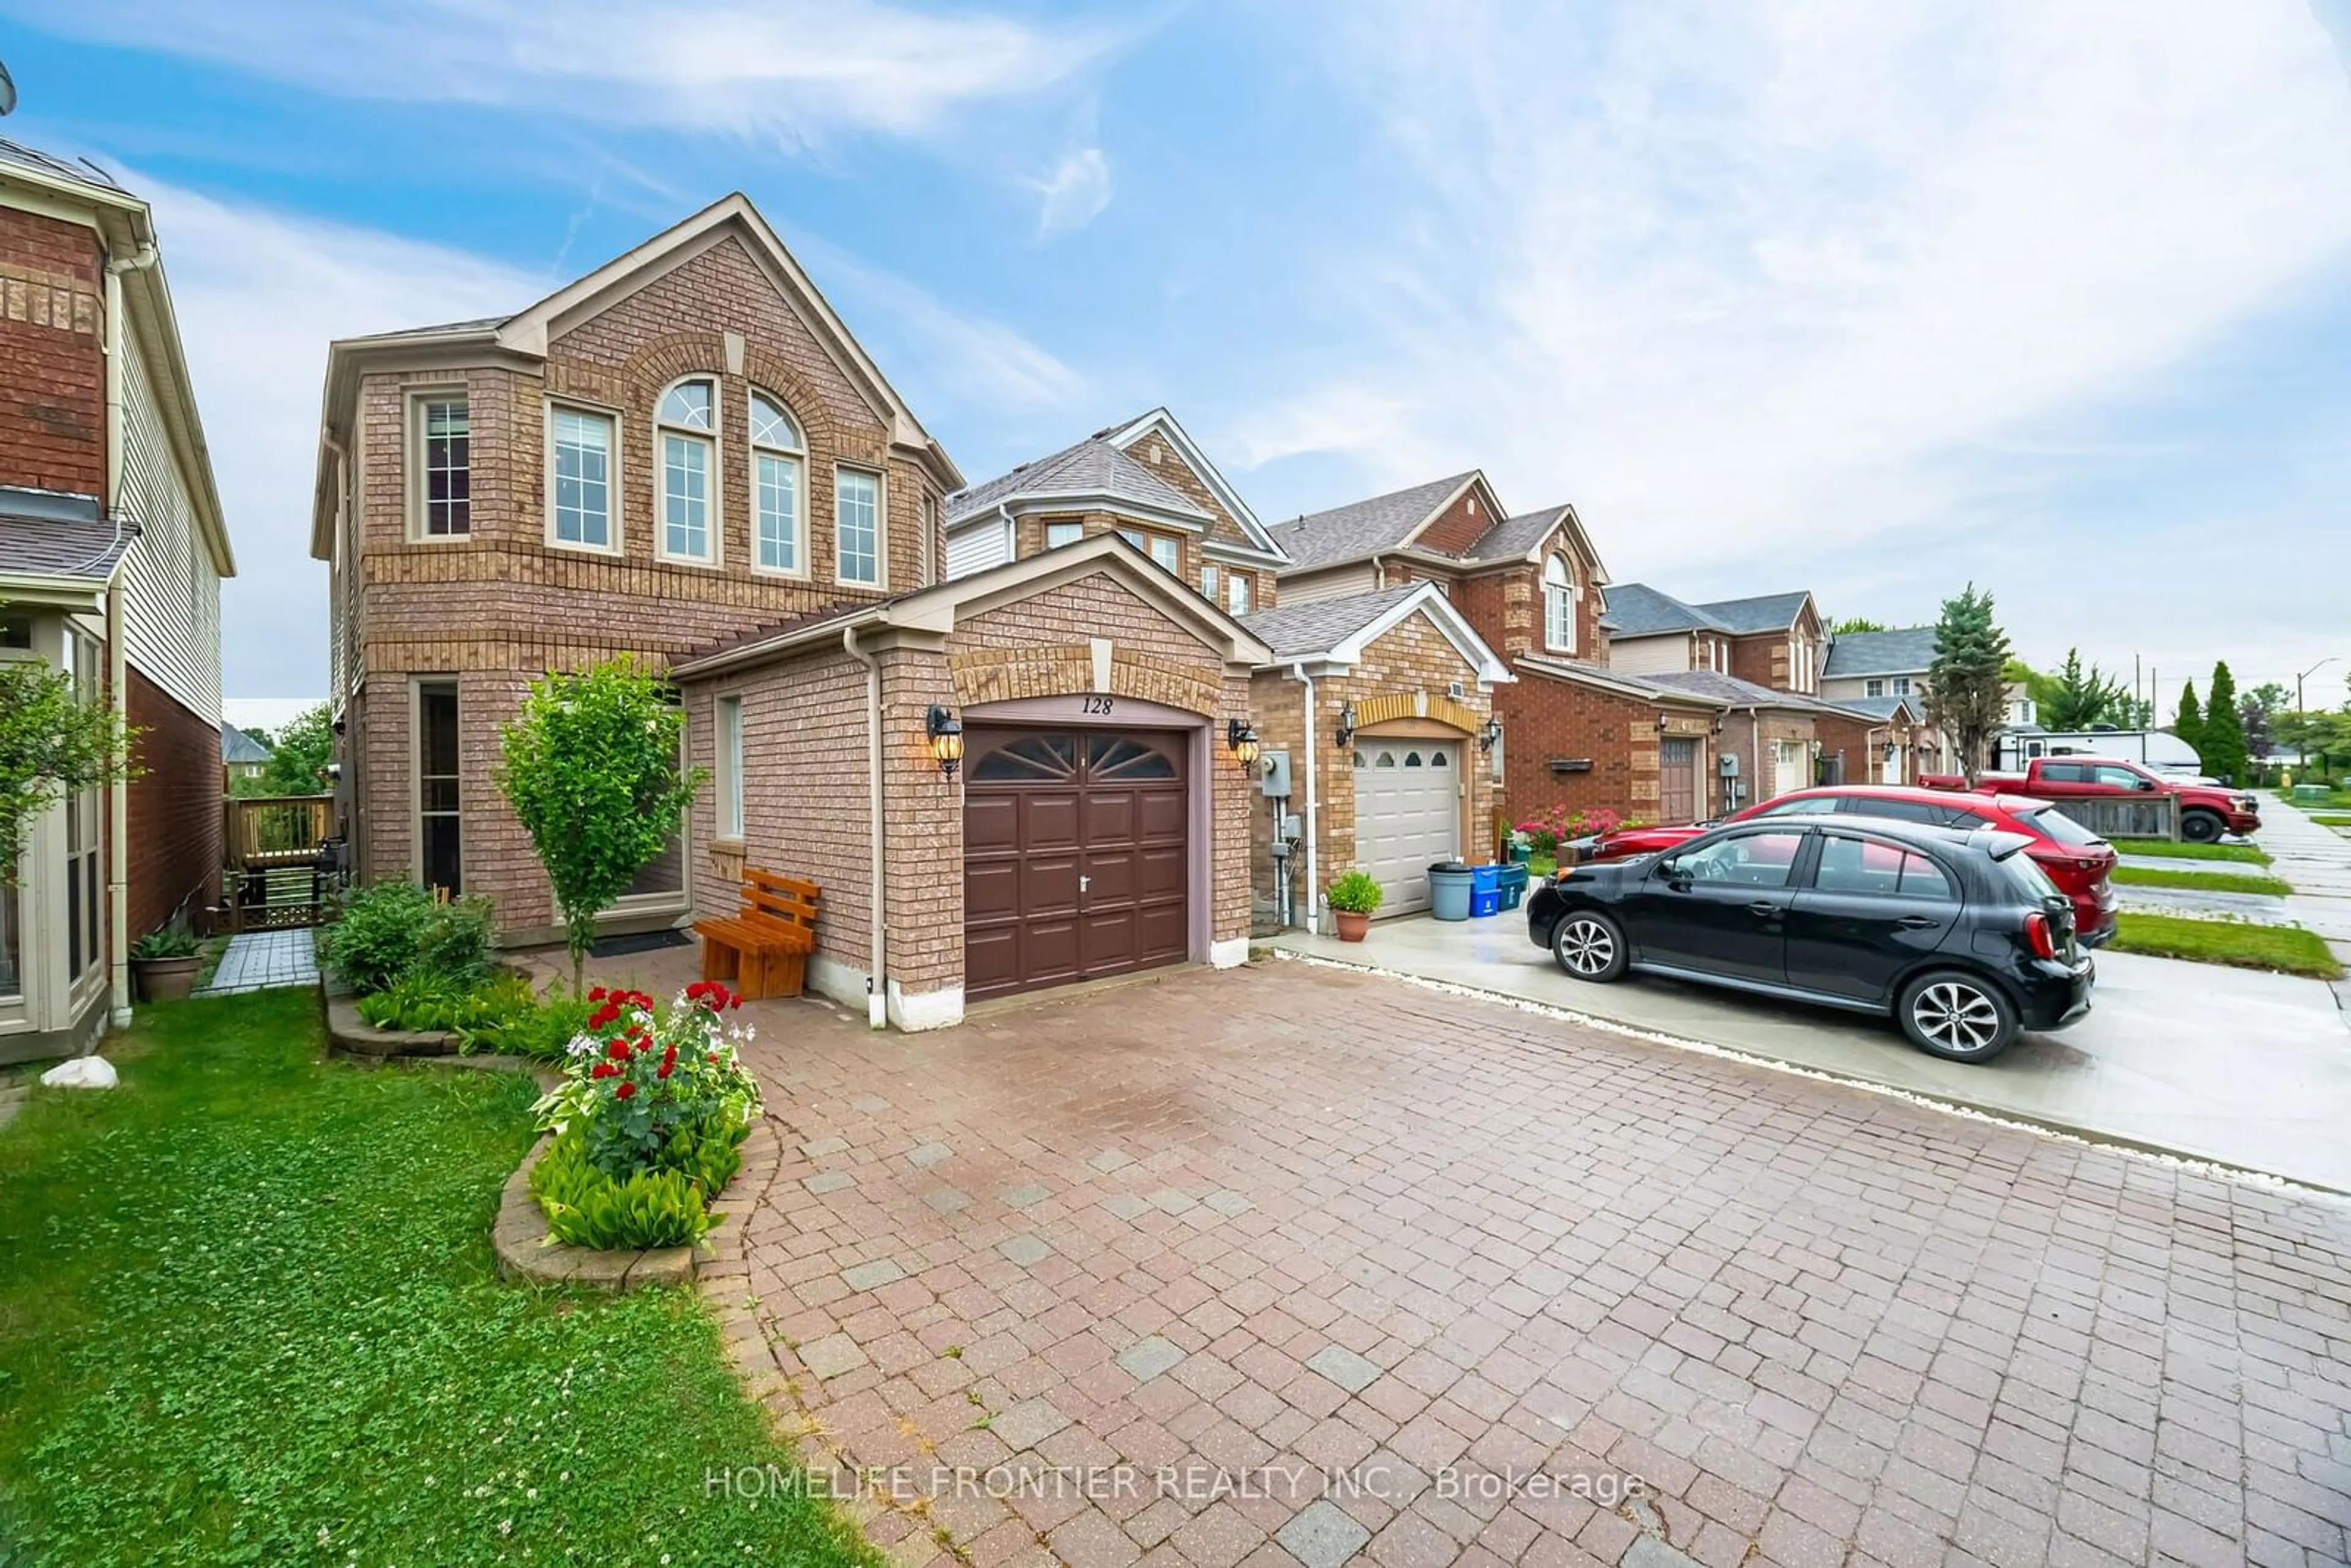 Home with brick exterior material for 128 Smales Dr, Ajax Ontario L1Z 1G8